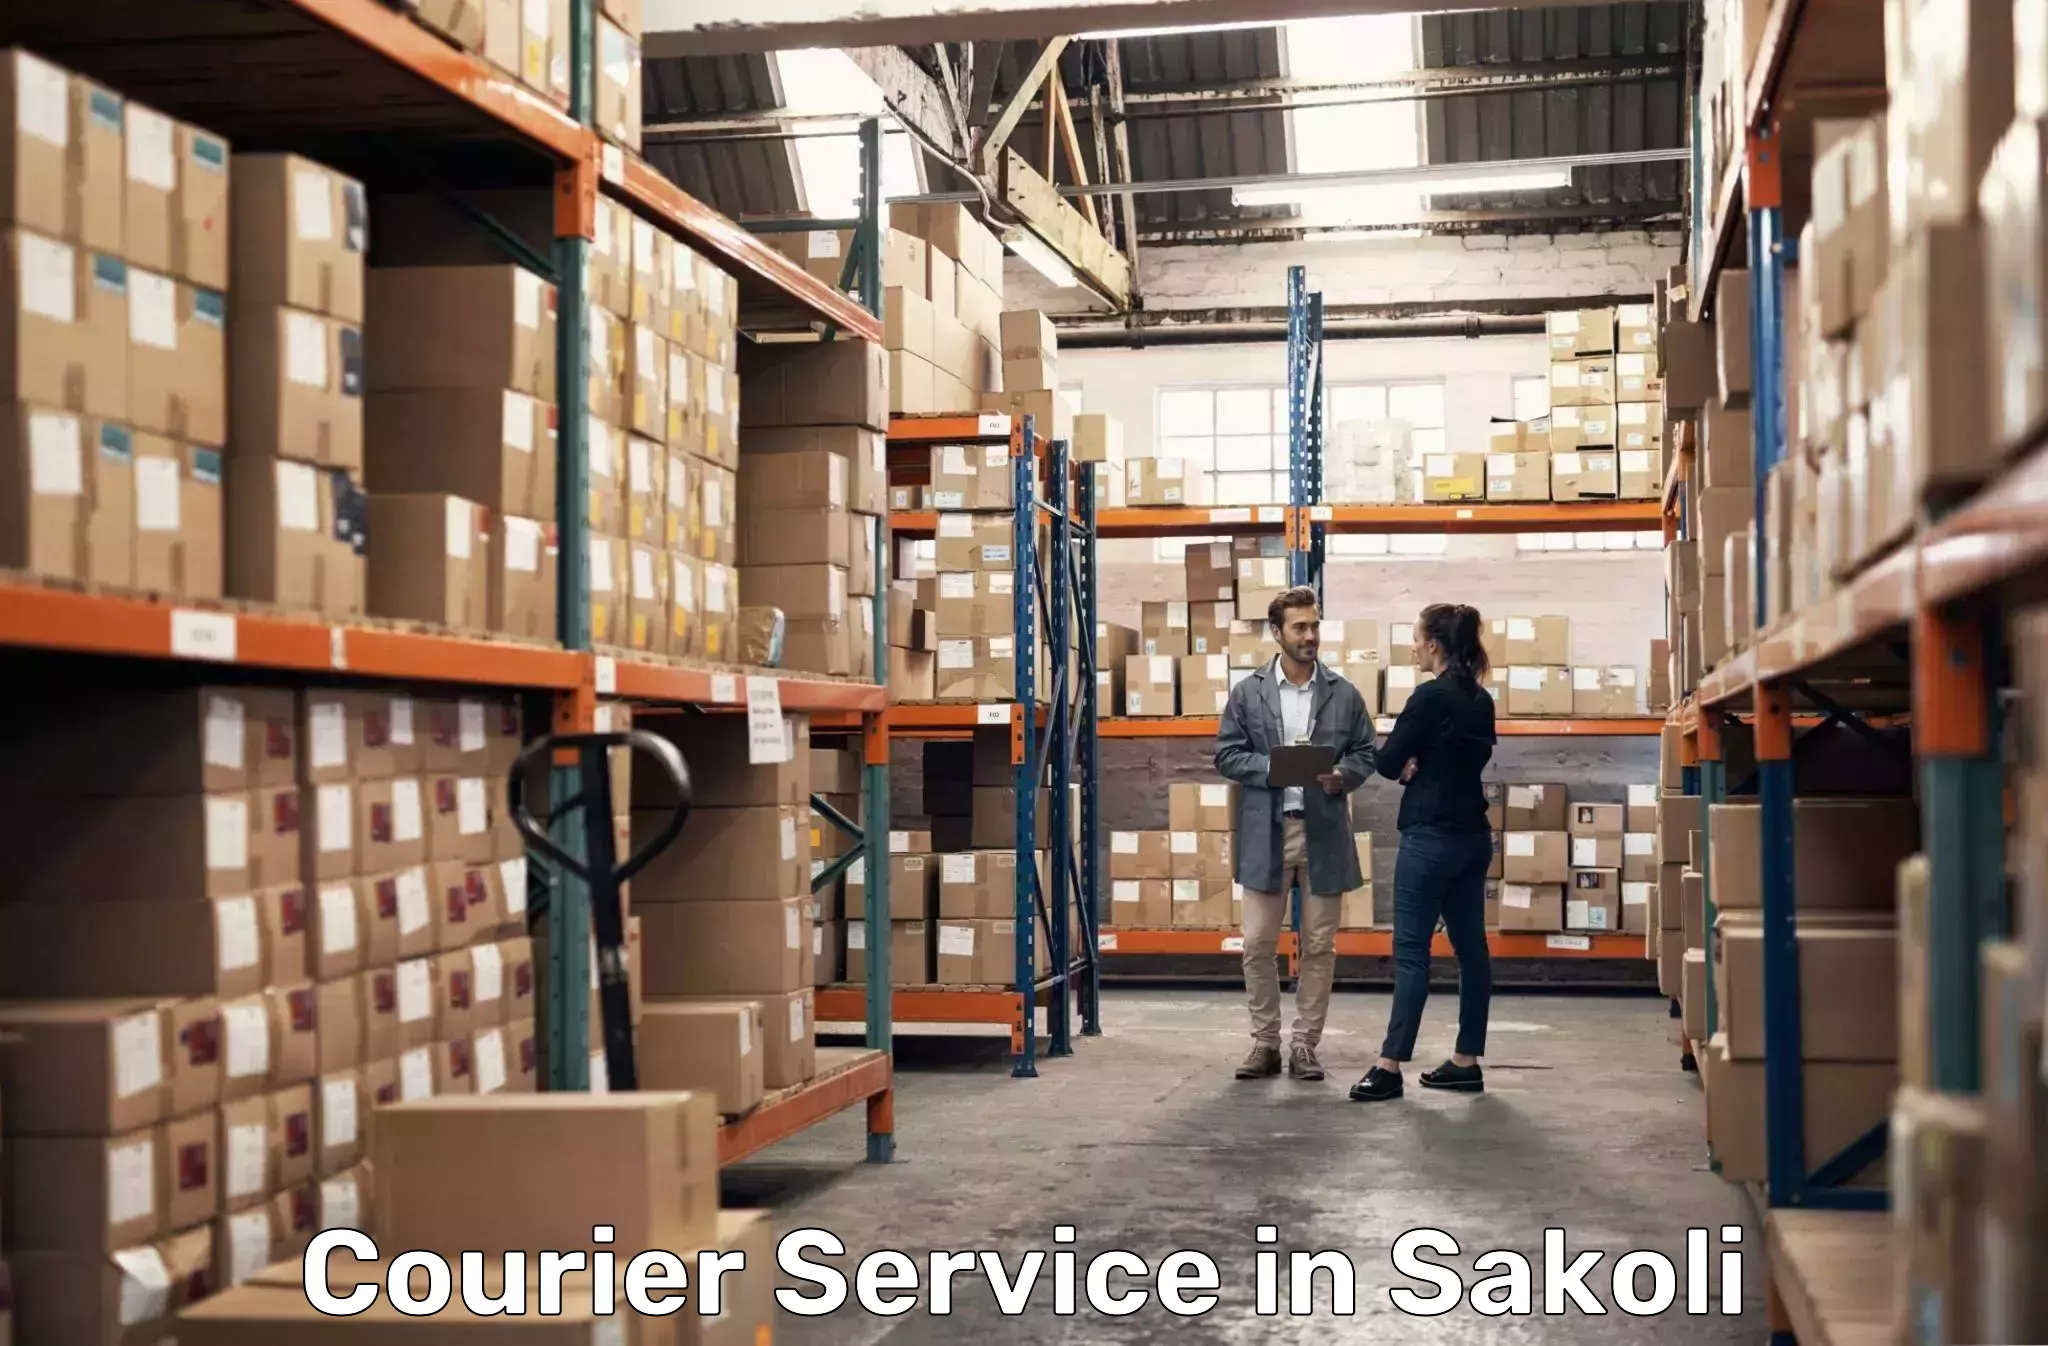 Customer-oriented courier services in Sakoli